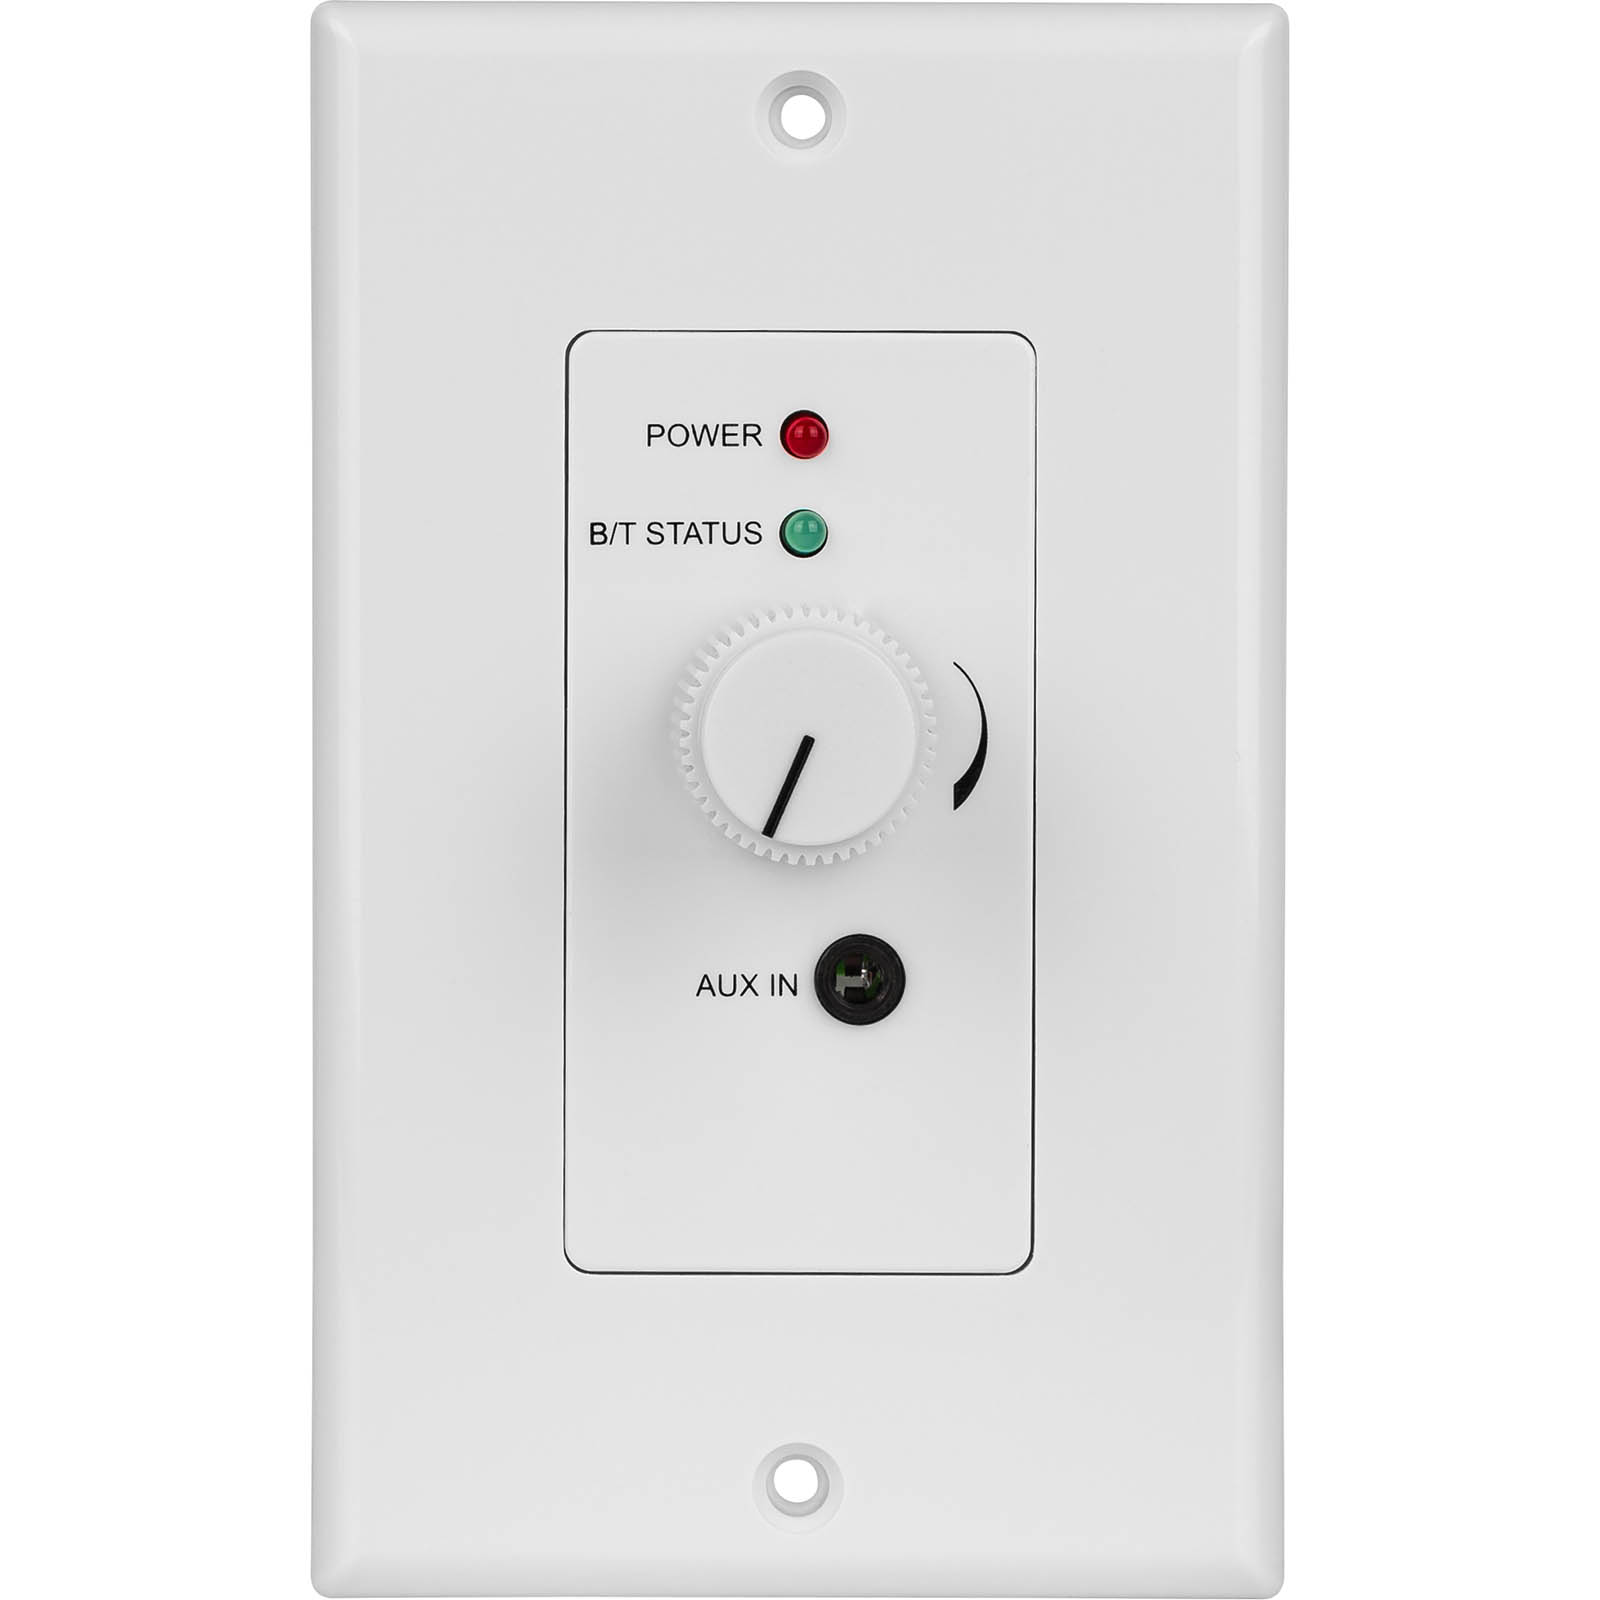 Image of the front face of the wall plate.